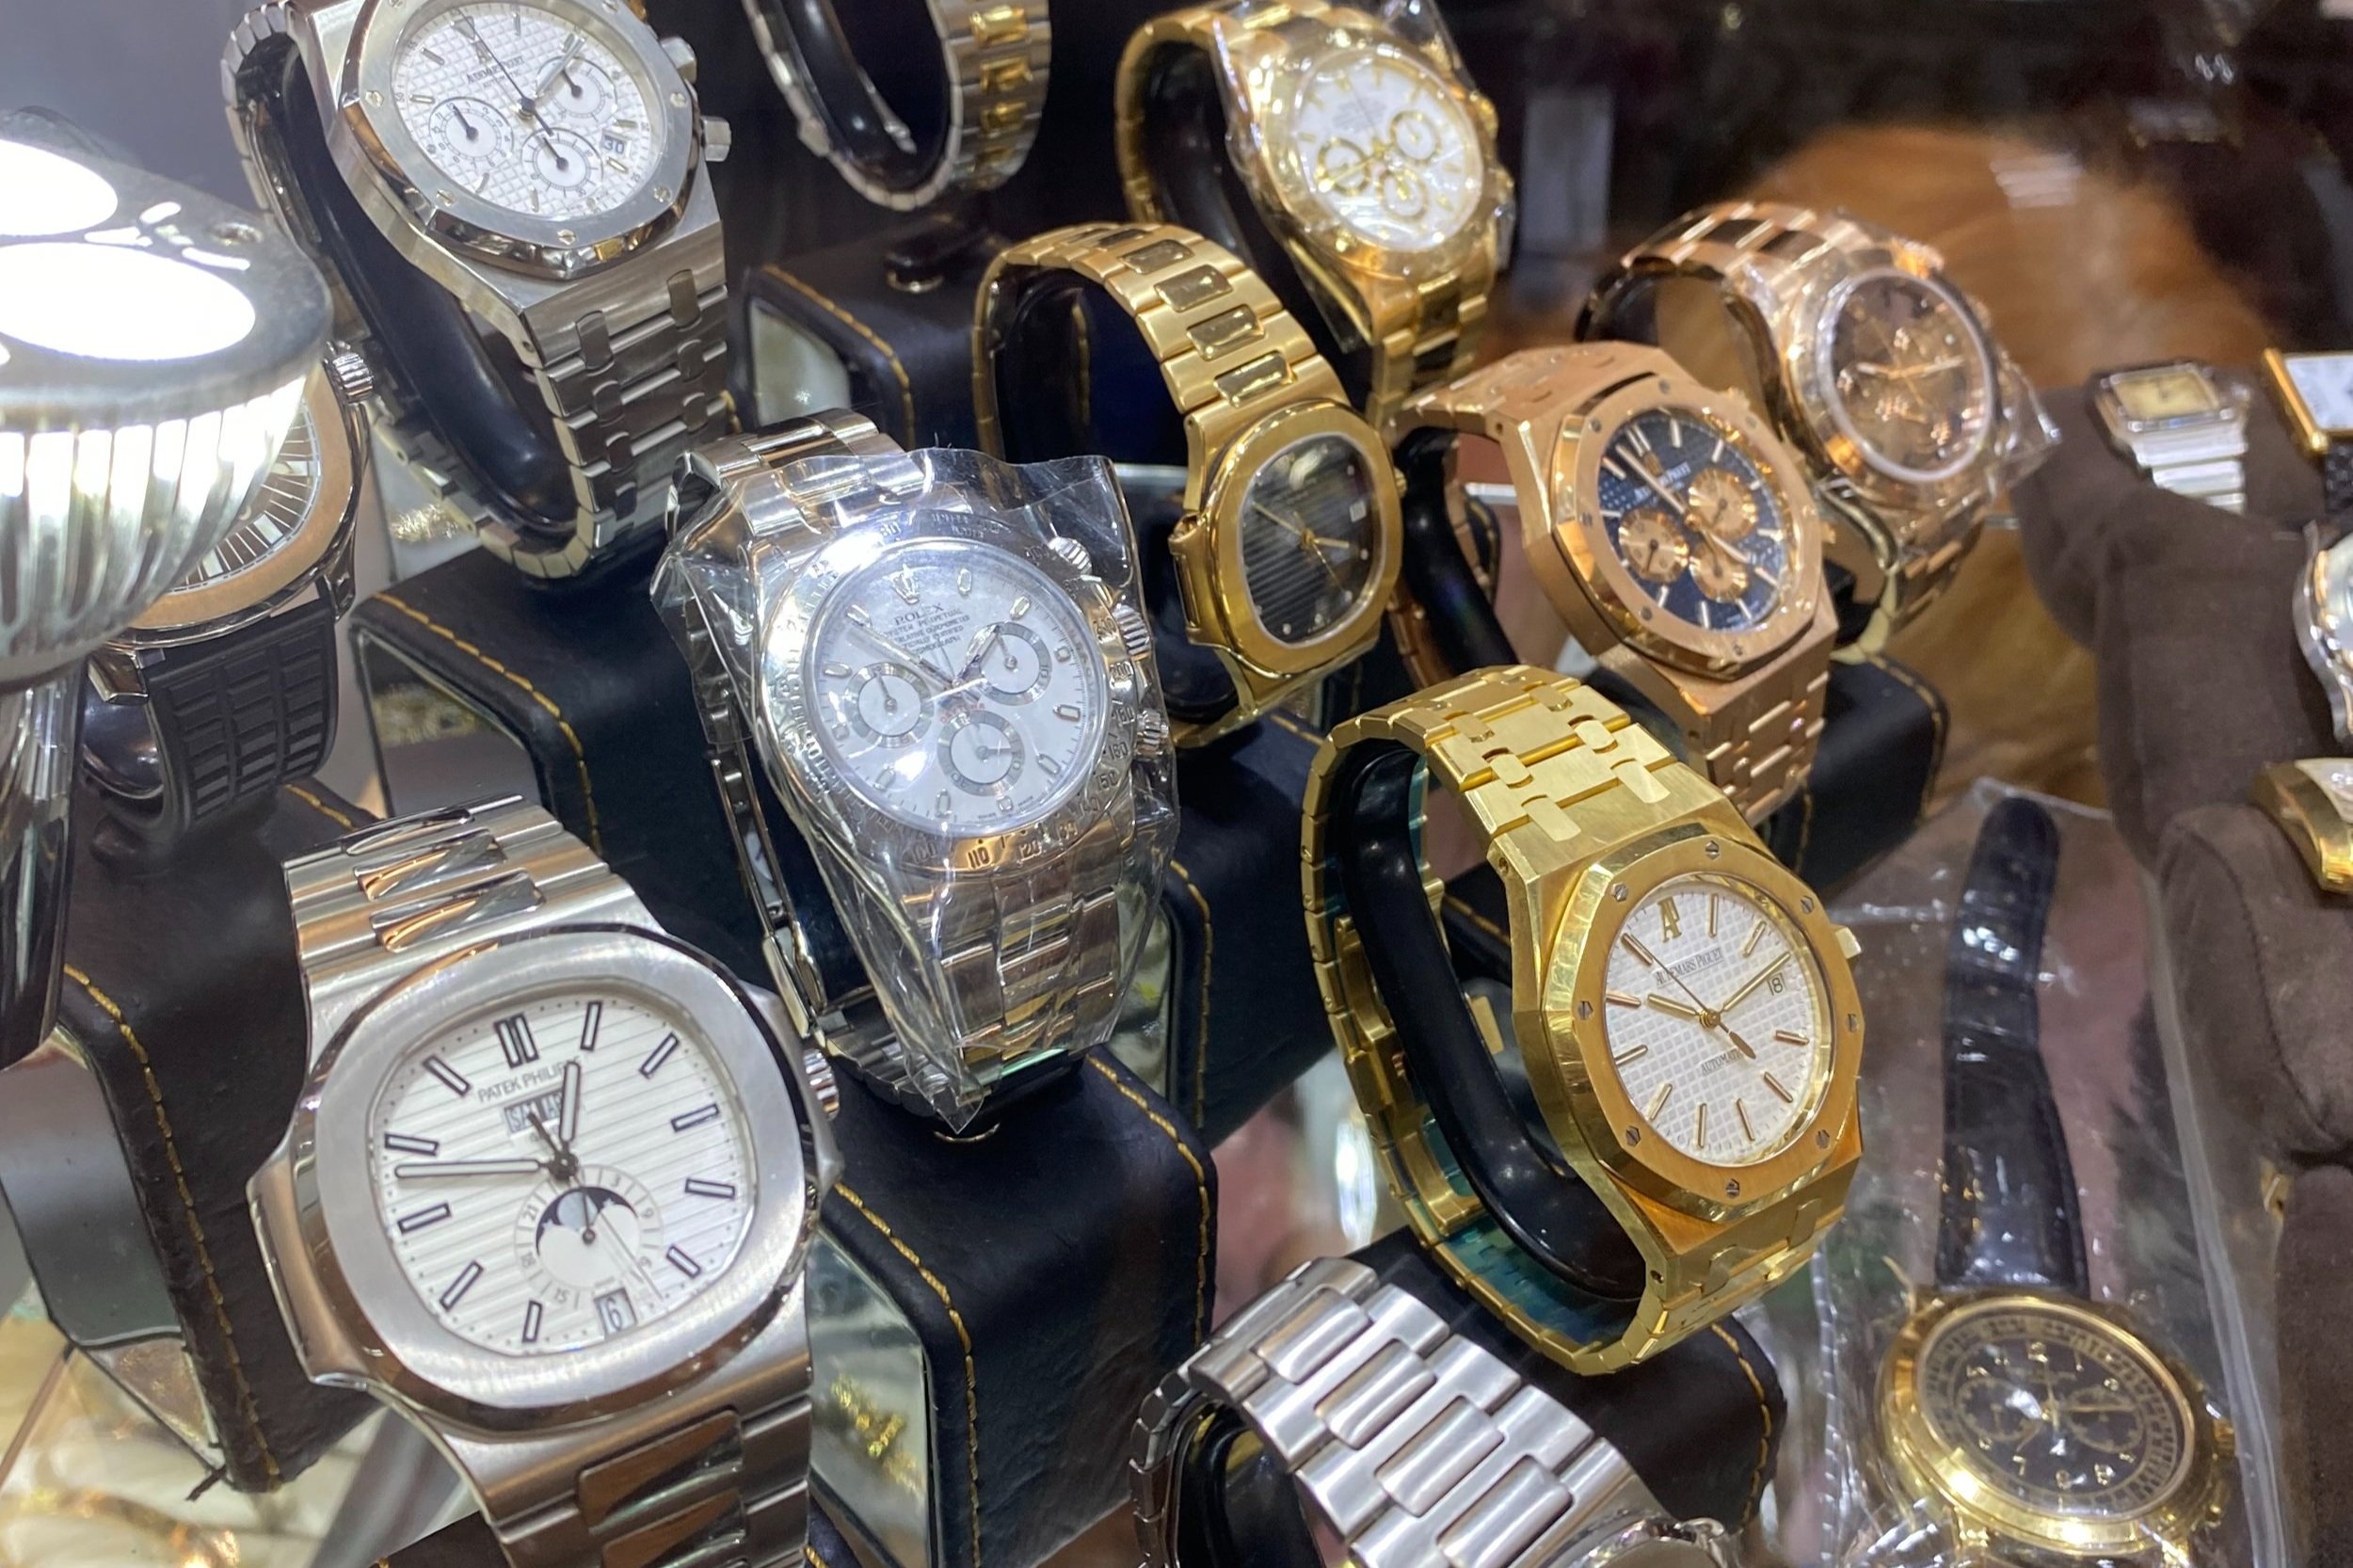 Show Report: The New York City Jewelry & Watch Show — Danny's